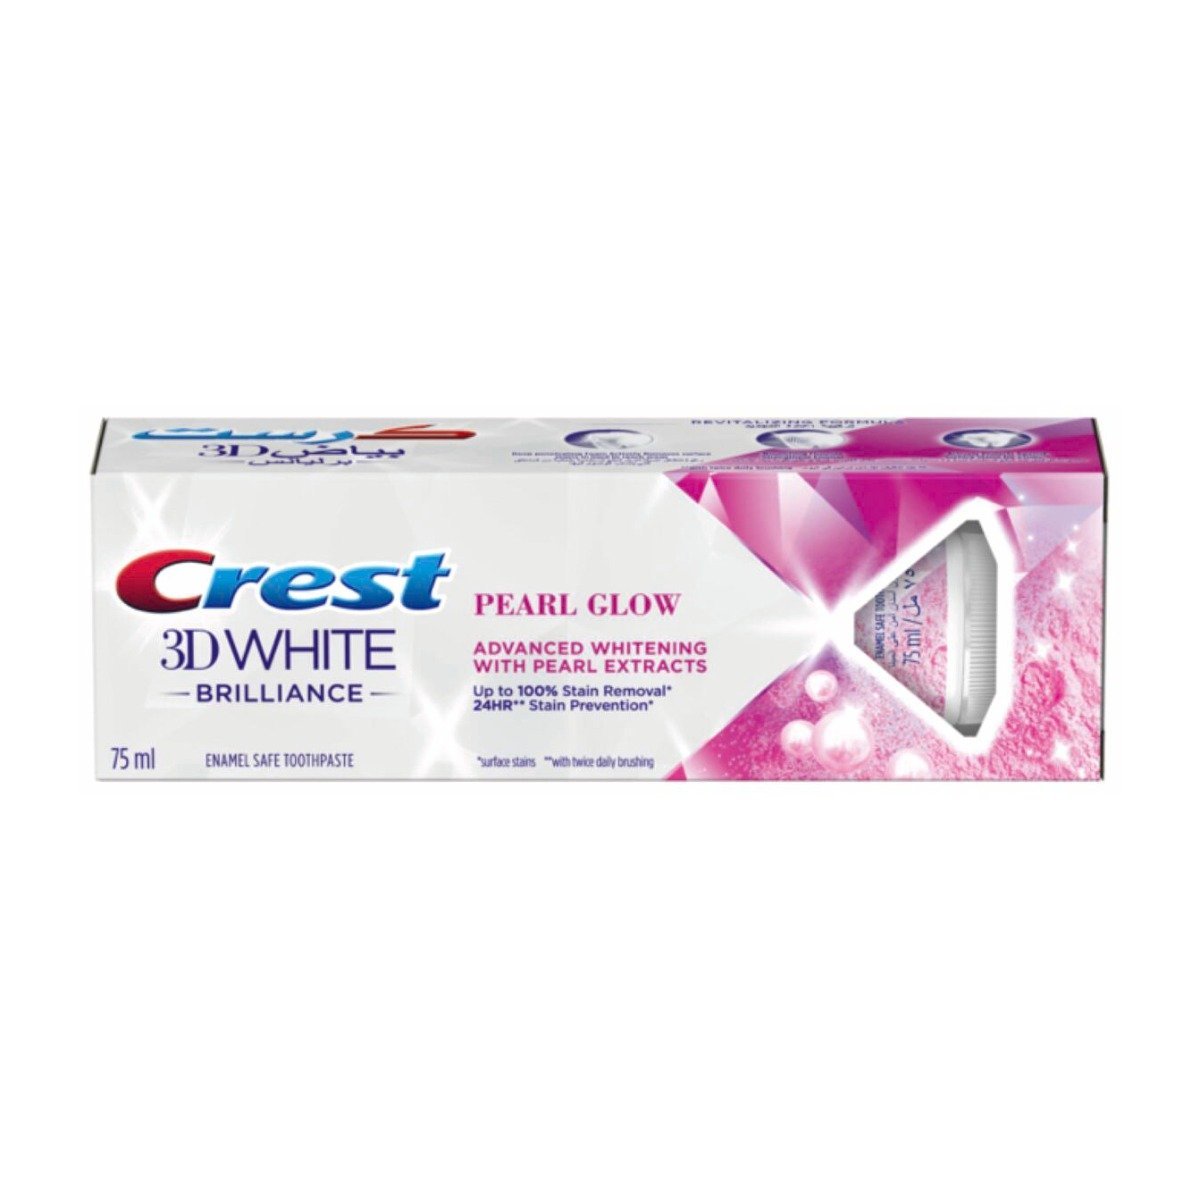 Crest 3D White Brilliance Pearl Glow Toothpaste - 75ml - Bloom Pharmacy